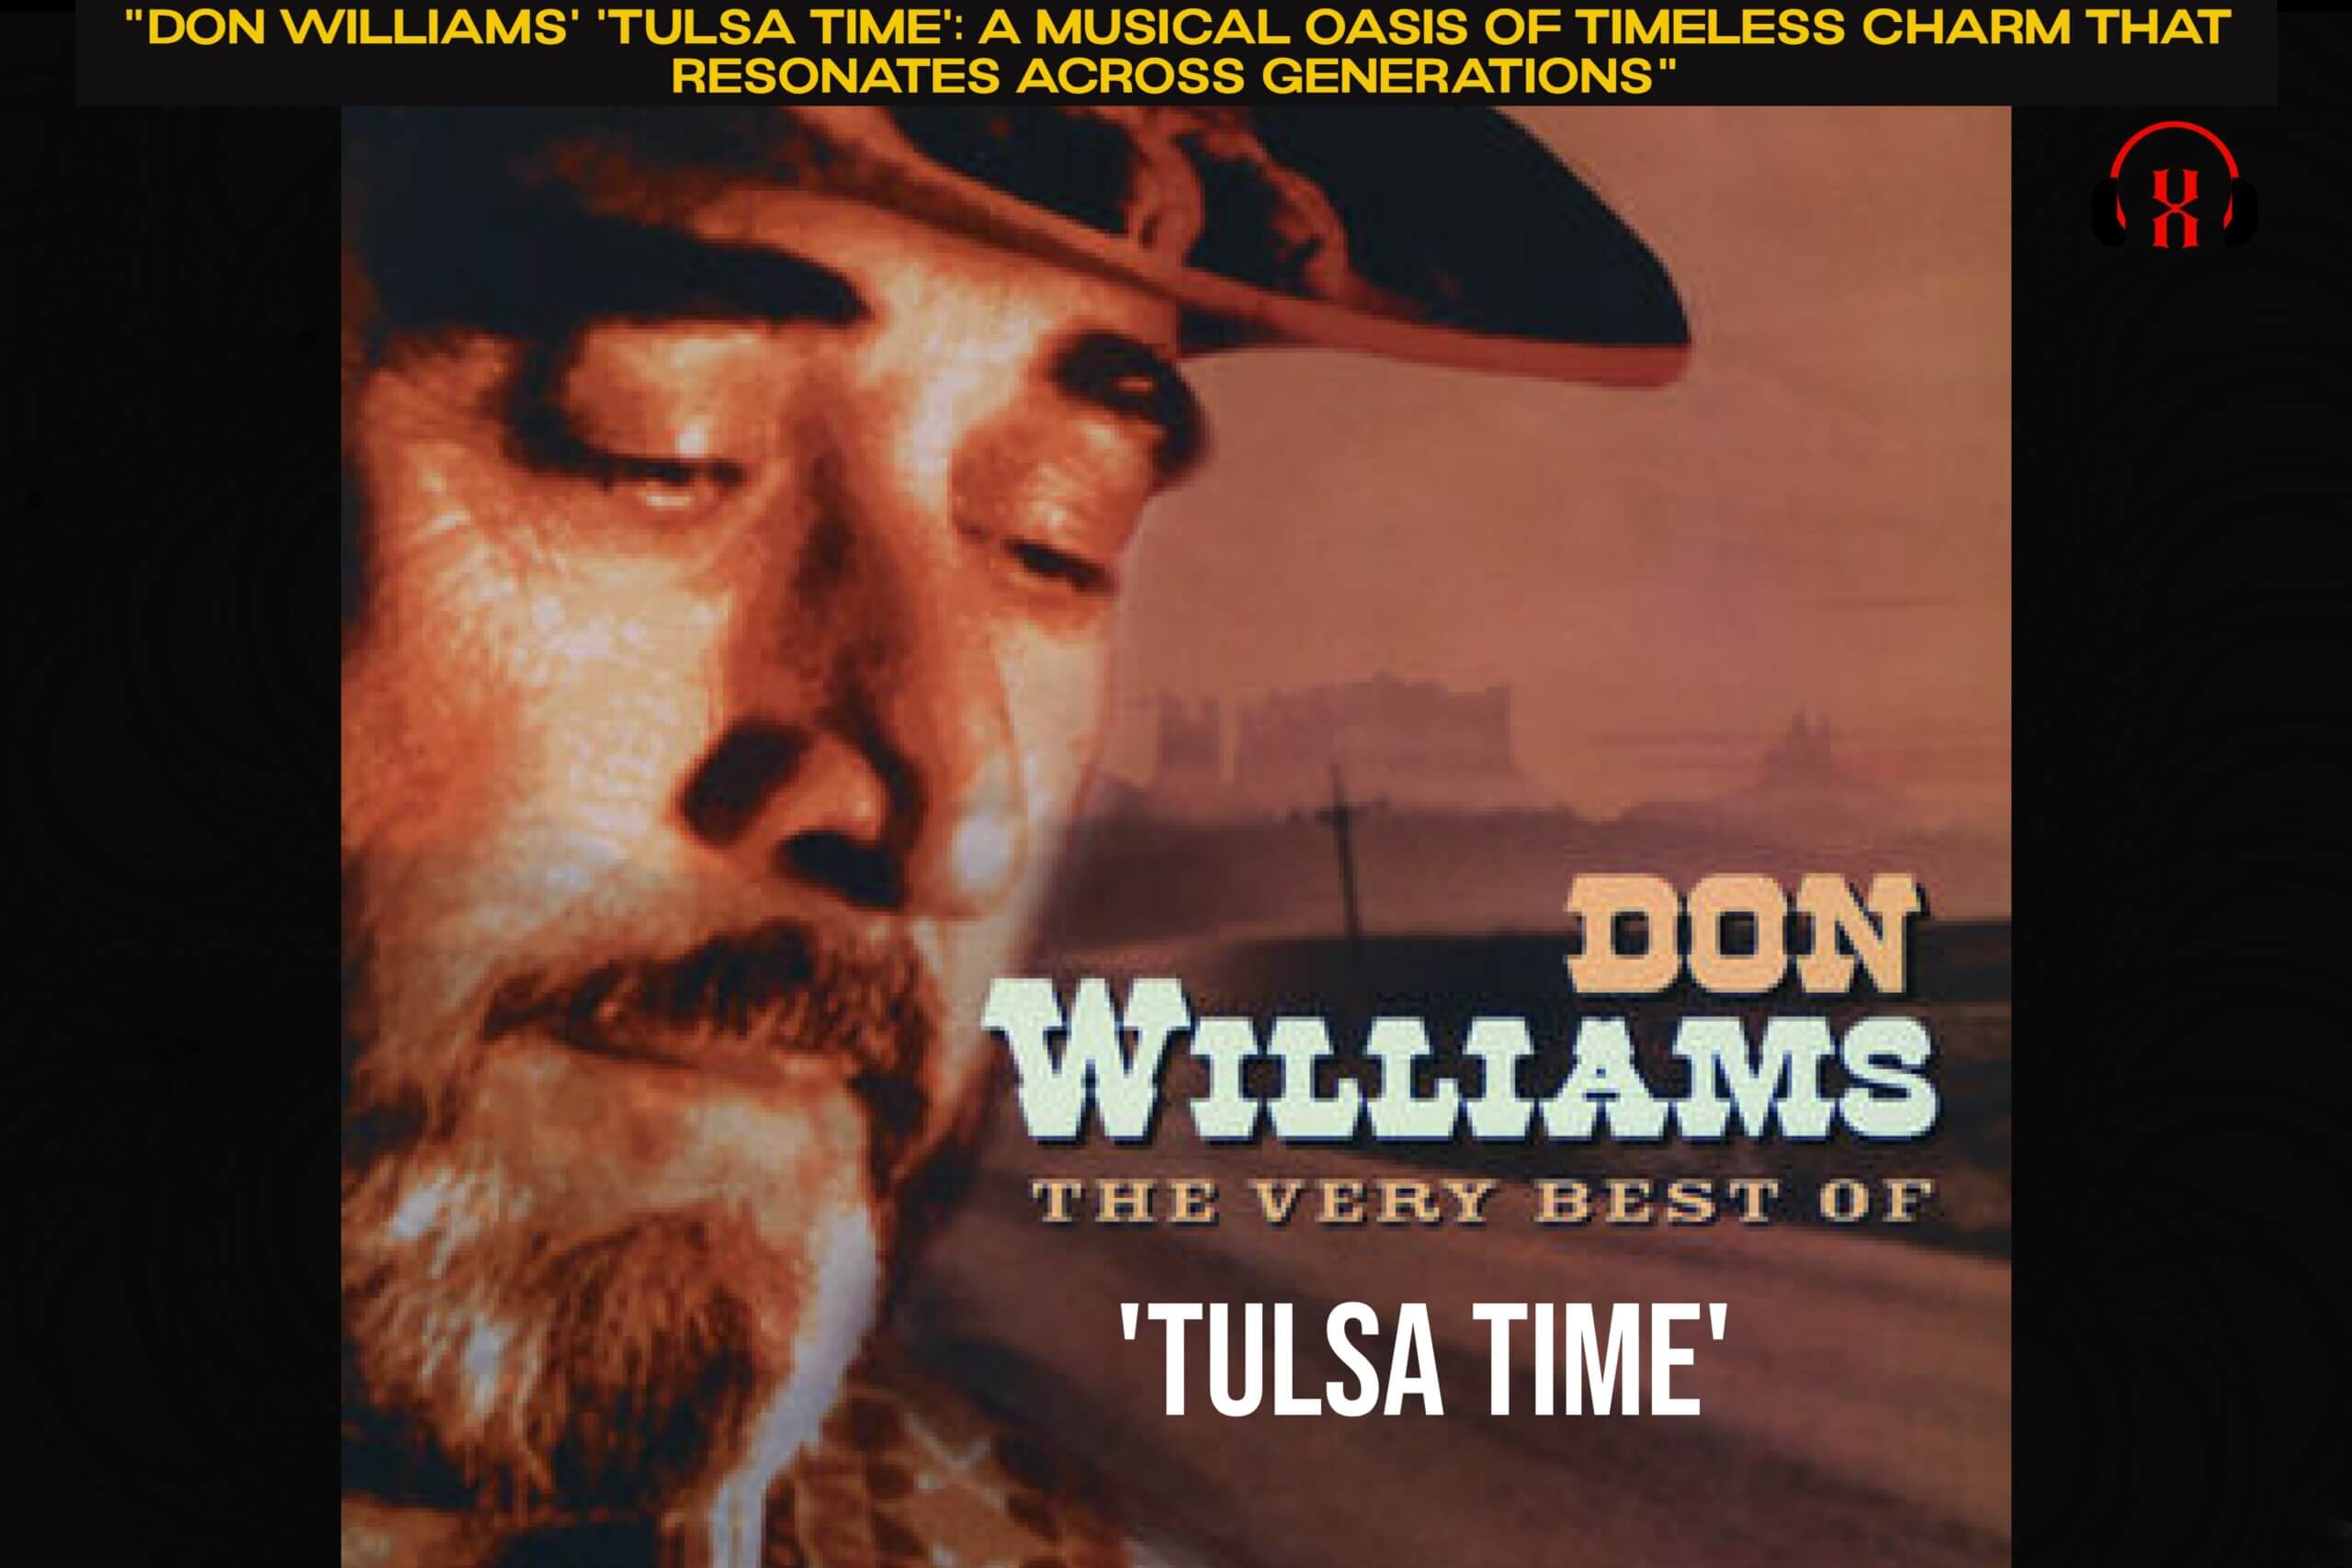 "Don Williams' 'Tulsa Time': A Musical Oasis of Timeless Charm That Resonates Across Generations"